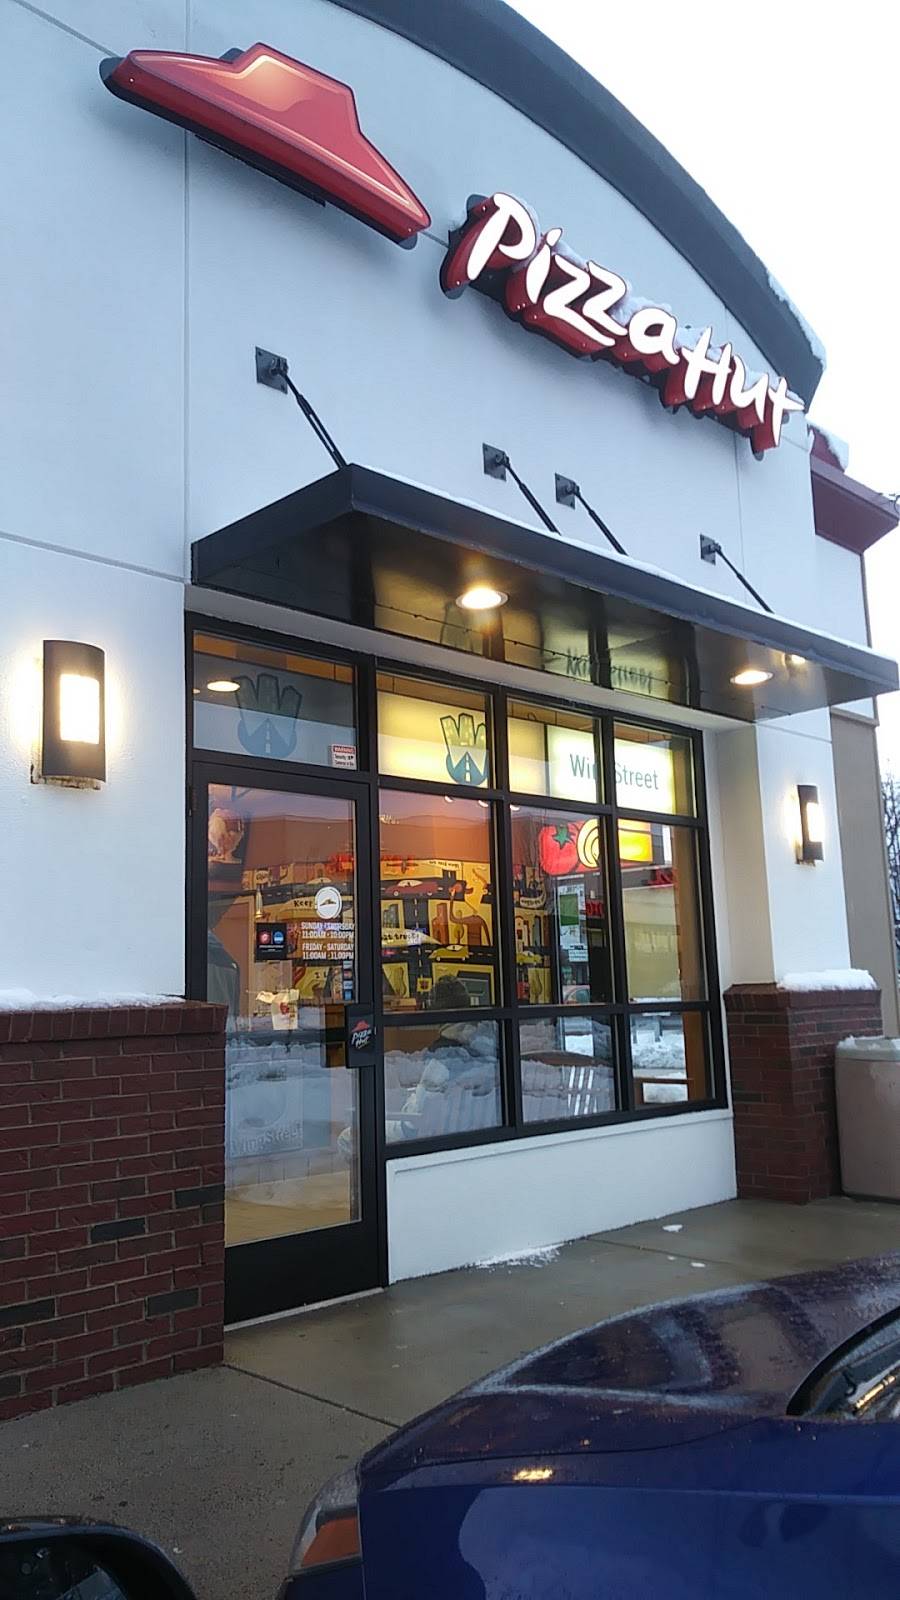 Pizza Hut | meal takeaway | 7 Sycamore St, Everett, MA 02149, USA | 7813213335 OR +1 781-321-3335